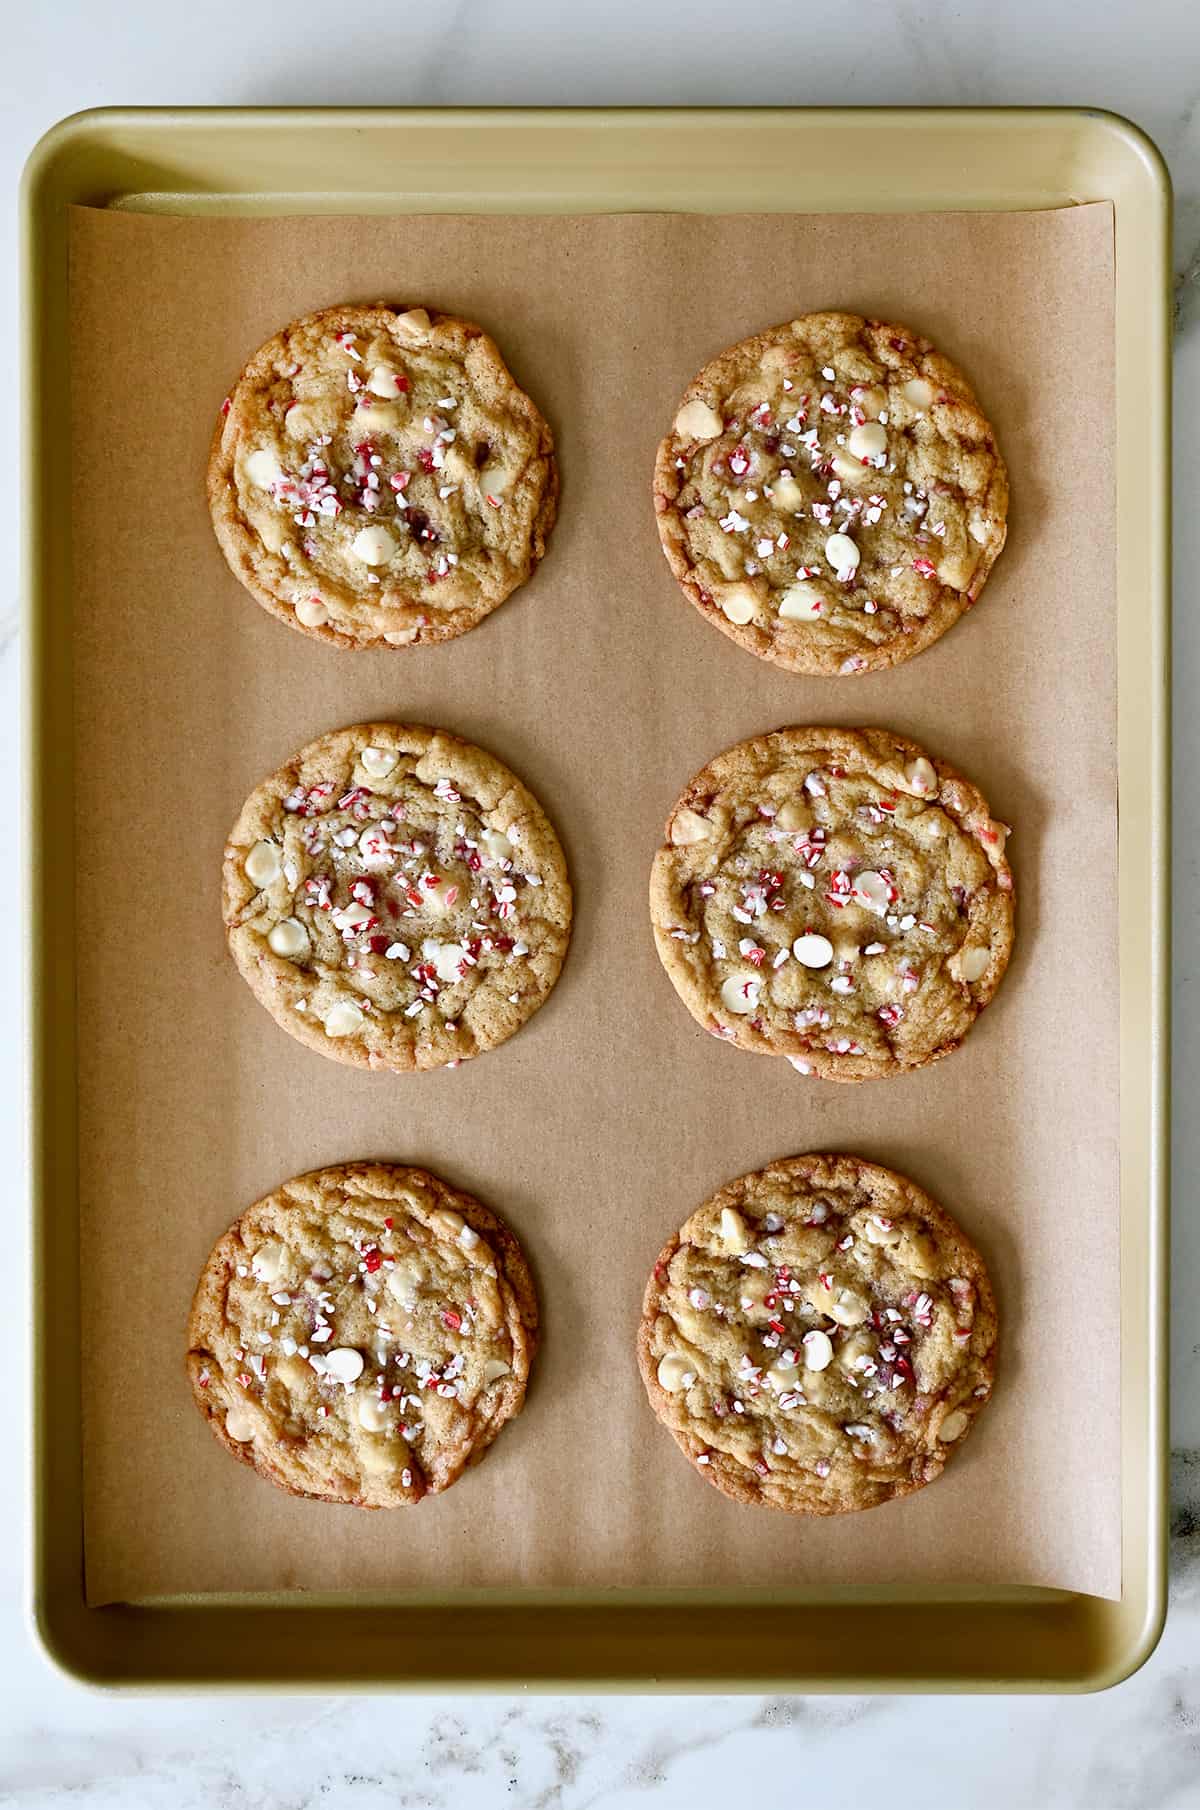 Six peppermint white chocolate chip cookies cooling on a parchment paper-lined baking sheet.